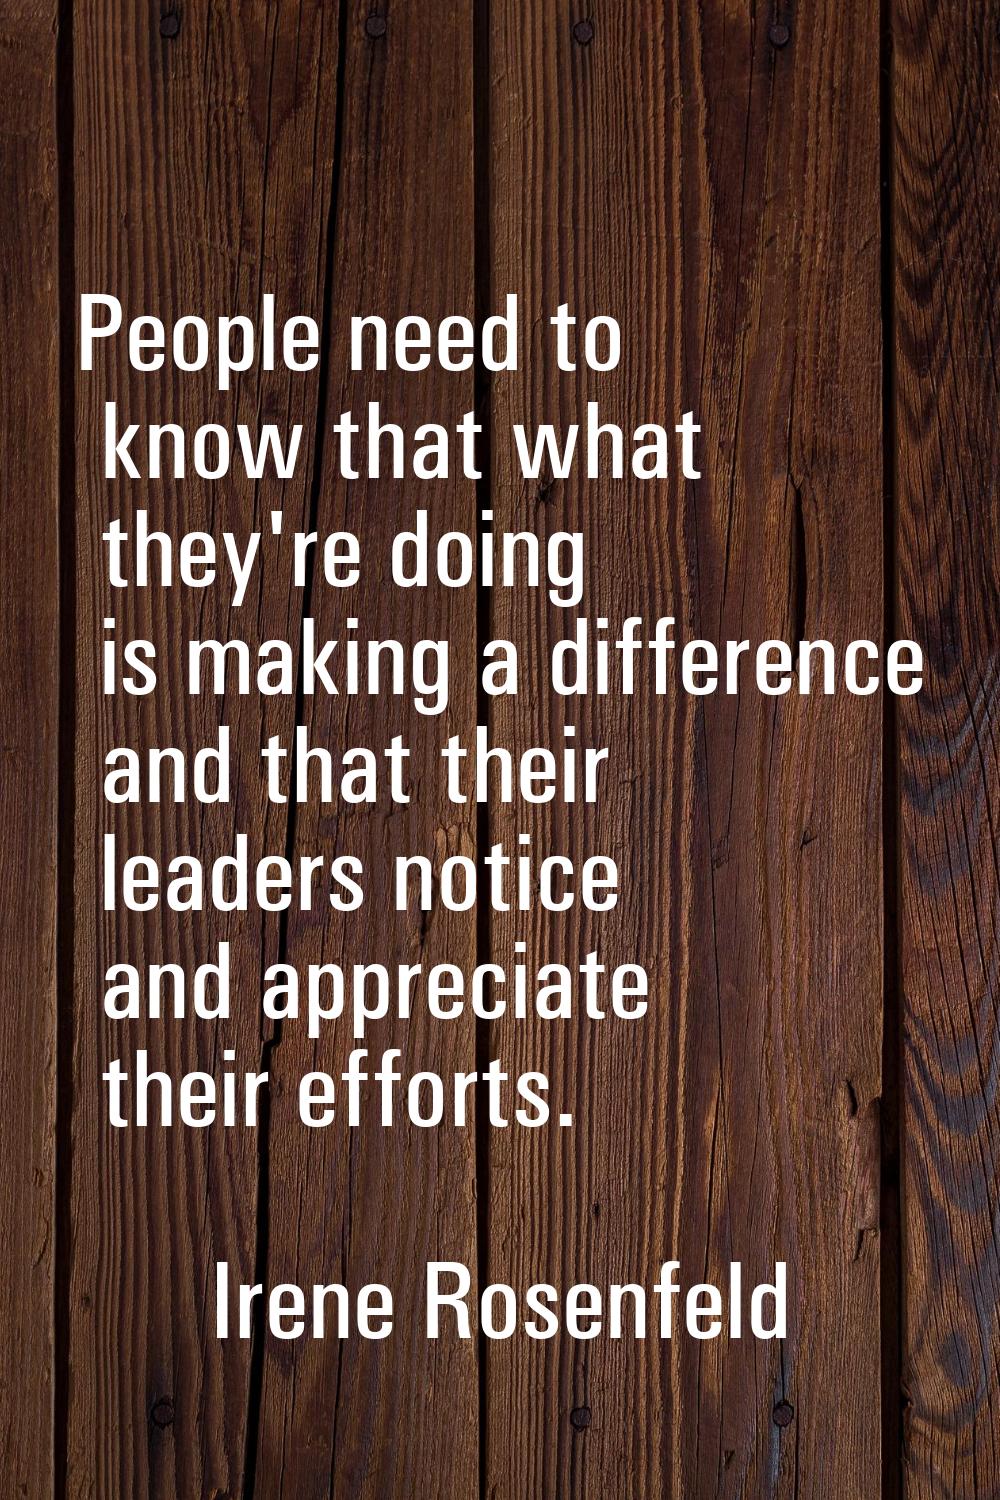 People need to know that what they're doing is making a difference and that their leaders notice an